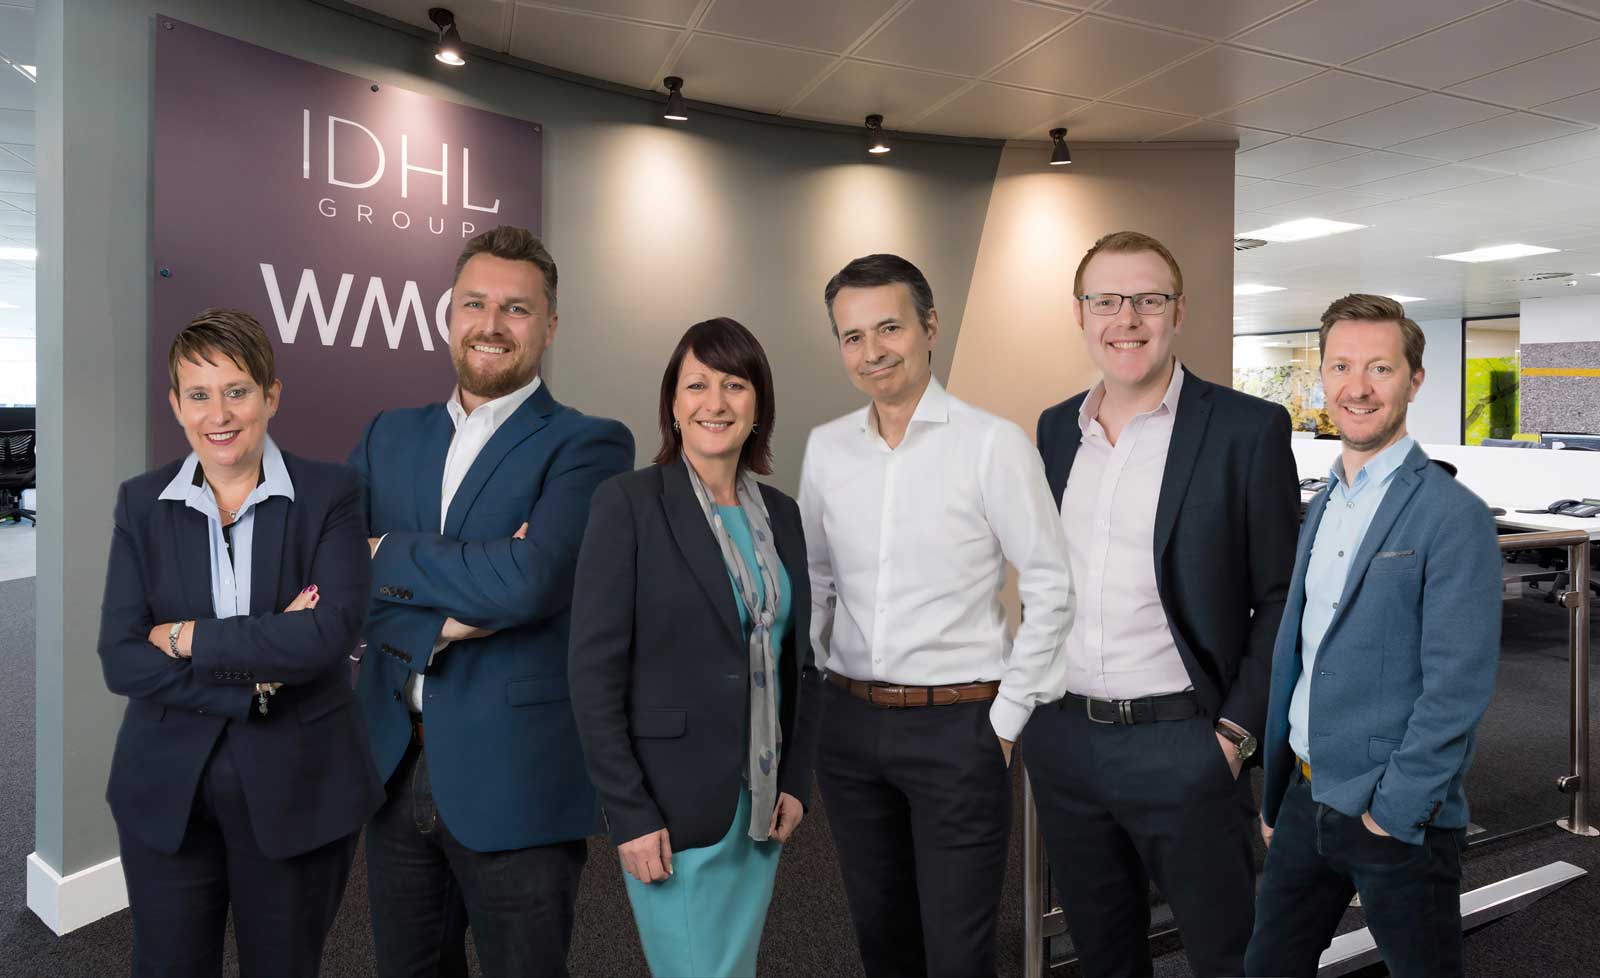 (from L to R) the IDHL Group Management - Julie Wood, Director of Sales Operations; Dean Skidmore, Director of Ingenuity Capital; Lisa Higham, Group Finance Director; Dennis Engel, Chief Executive; Richard Ellis, Director of Paid Media at WMG and Ian Lloyd, Director of Digital Operations at WMG. 